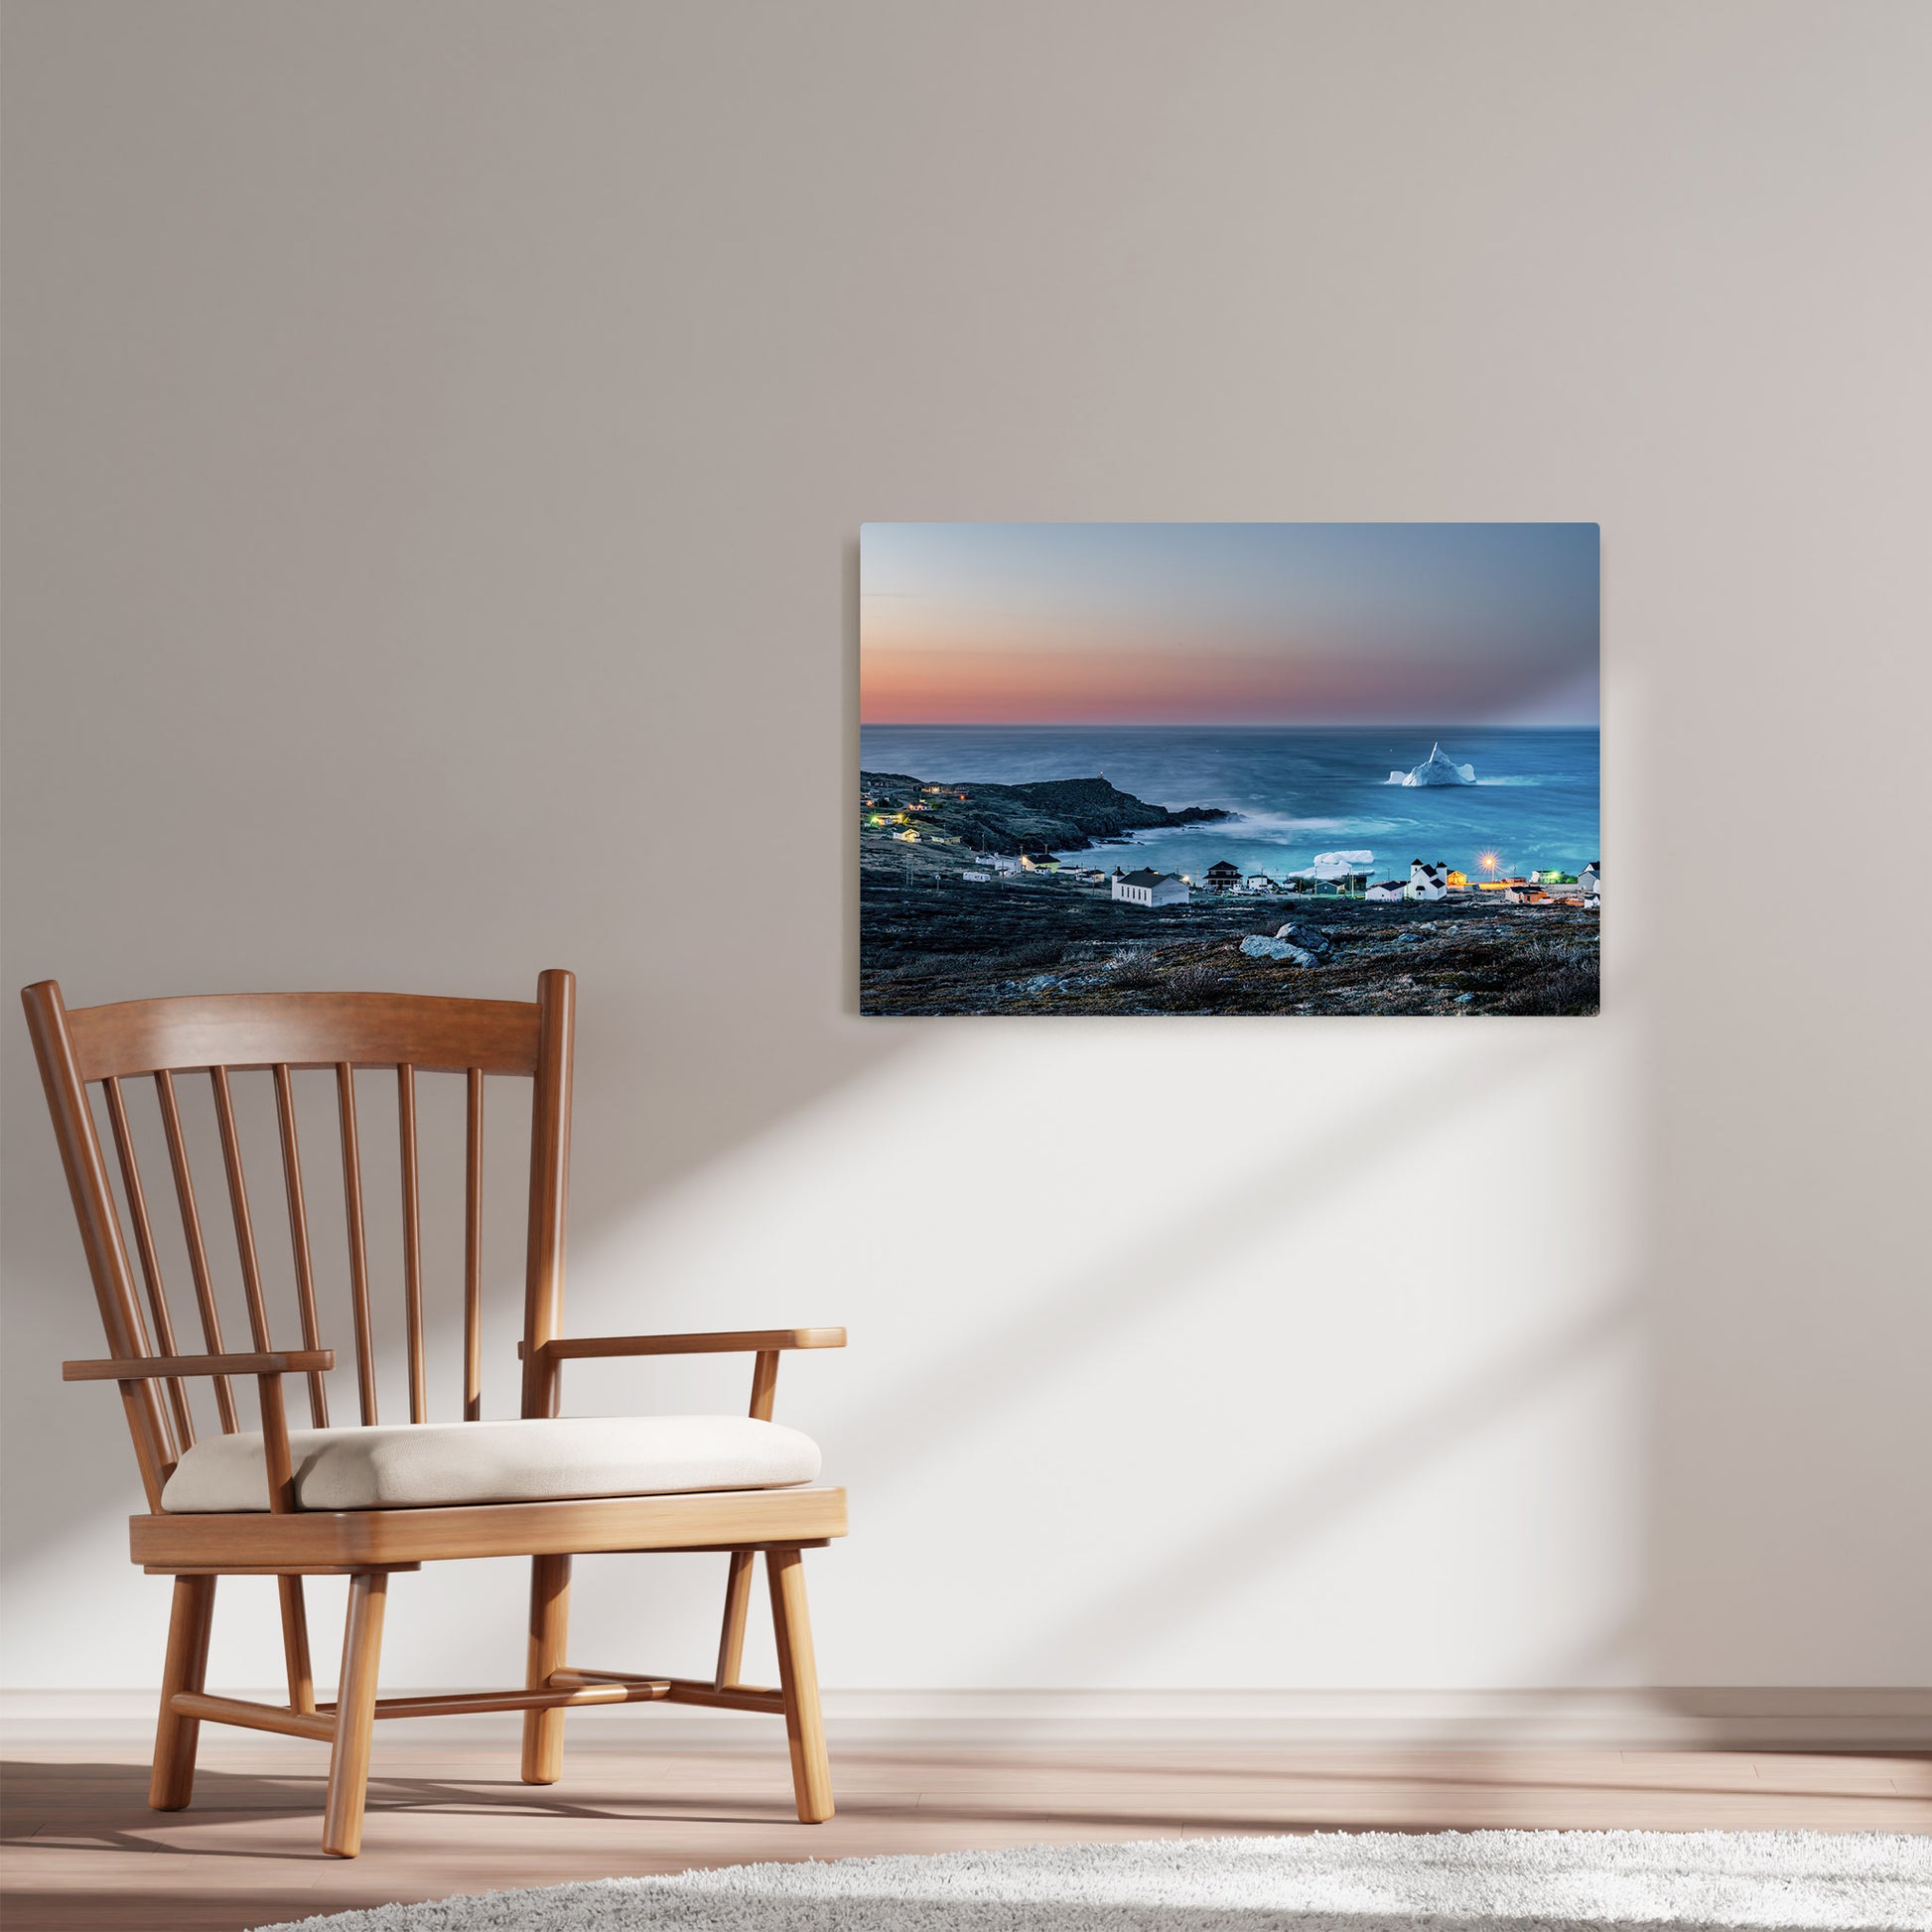 Ray Mackey's Grates Cove Blue Hour photography reproduced on HD metal print and displayed on wall